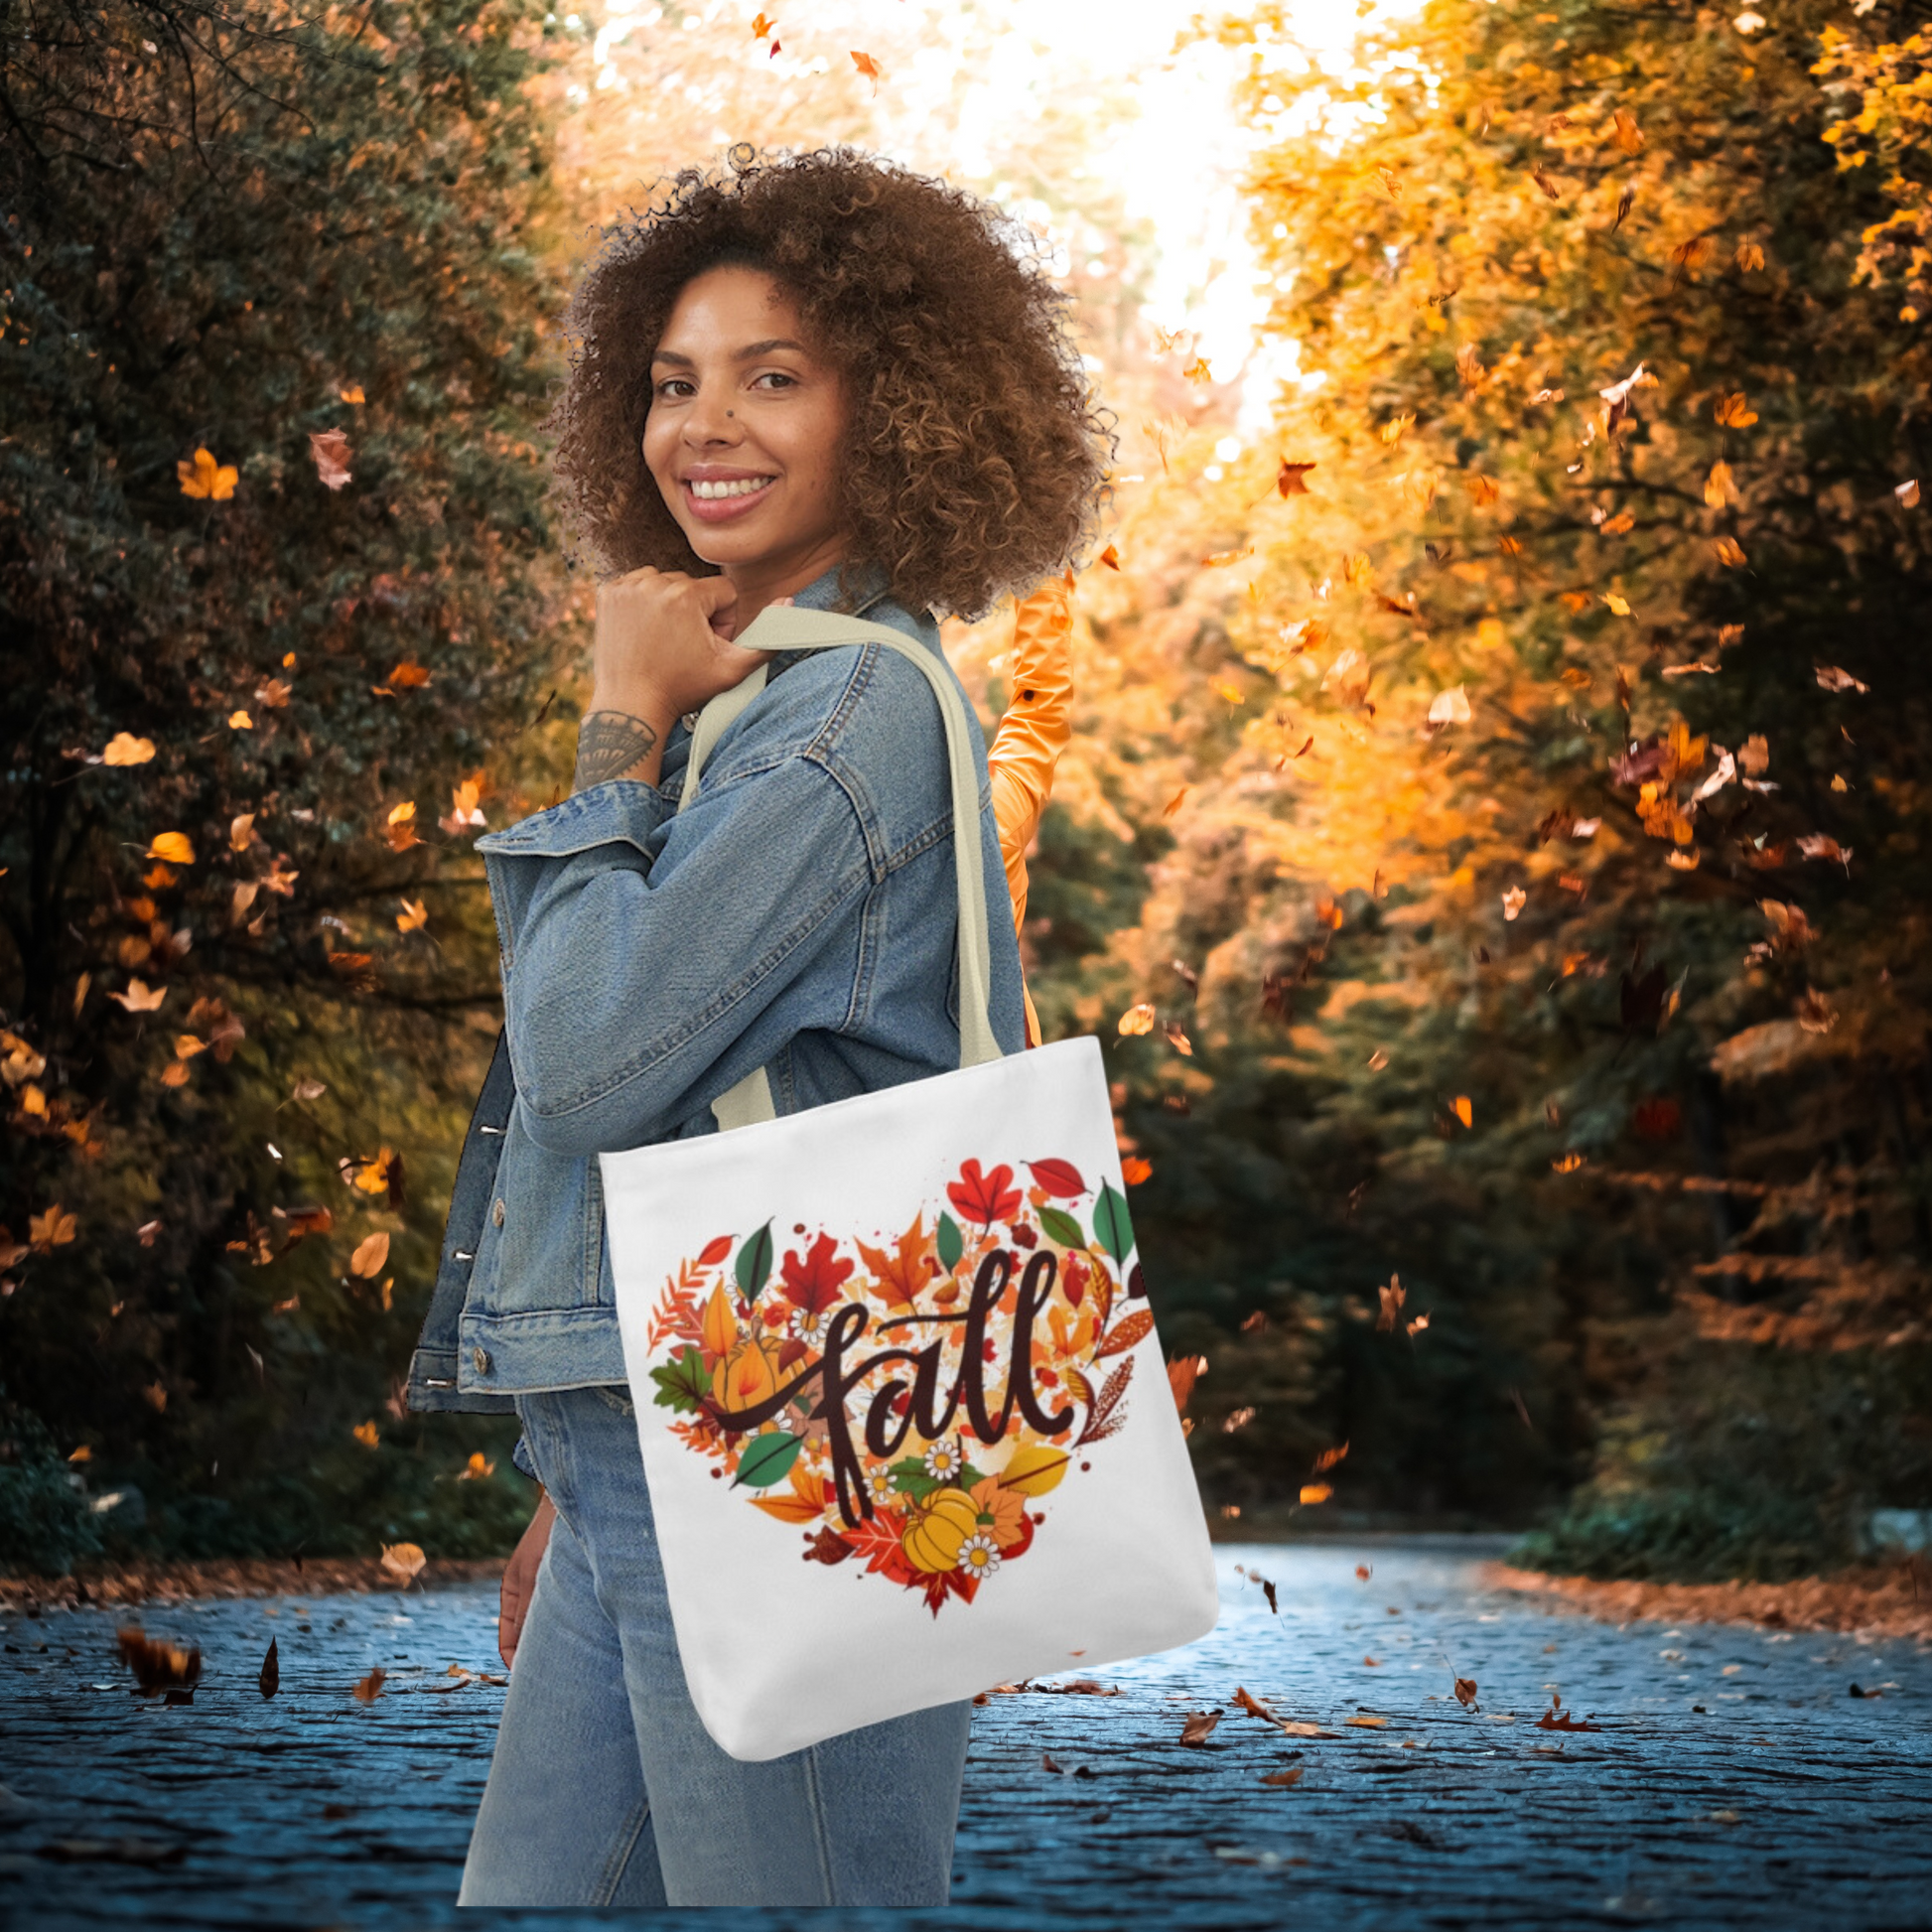 Love Fall Tote Bag - Pumpkin Style, Fall Shoulder Chic, Autumn Vibes, Theme Tote, Leaves Elegance, Gift for Her - Stylish Fall Bag Accessories   